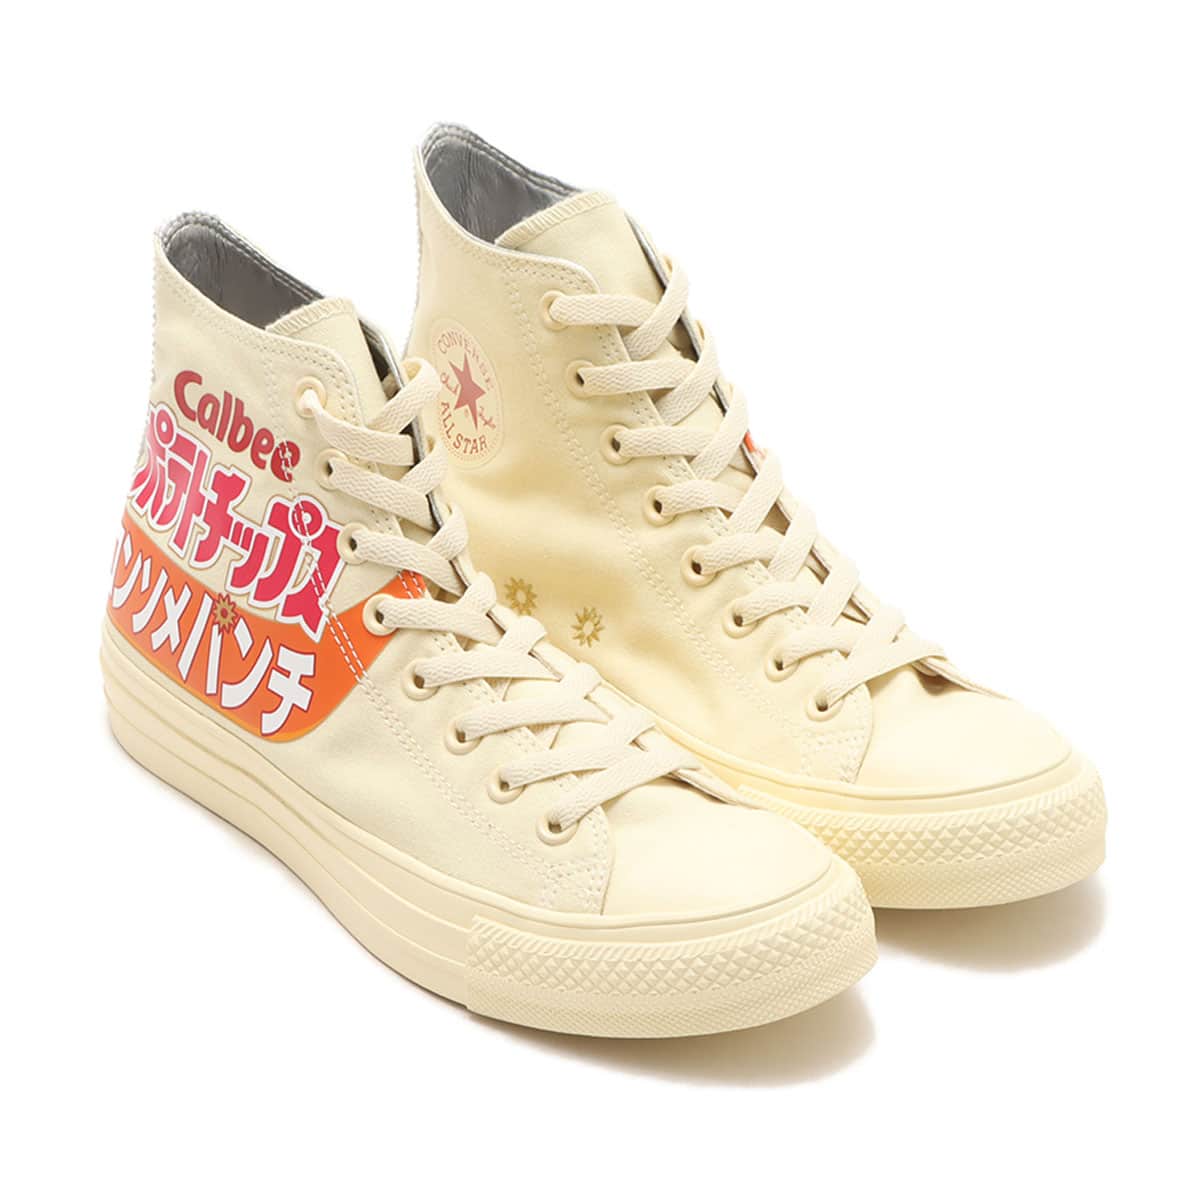 Calbee Converse All Star Potato Chips Hi Consomme Punch 27cm 31310190-